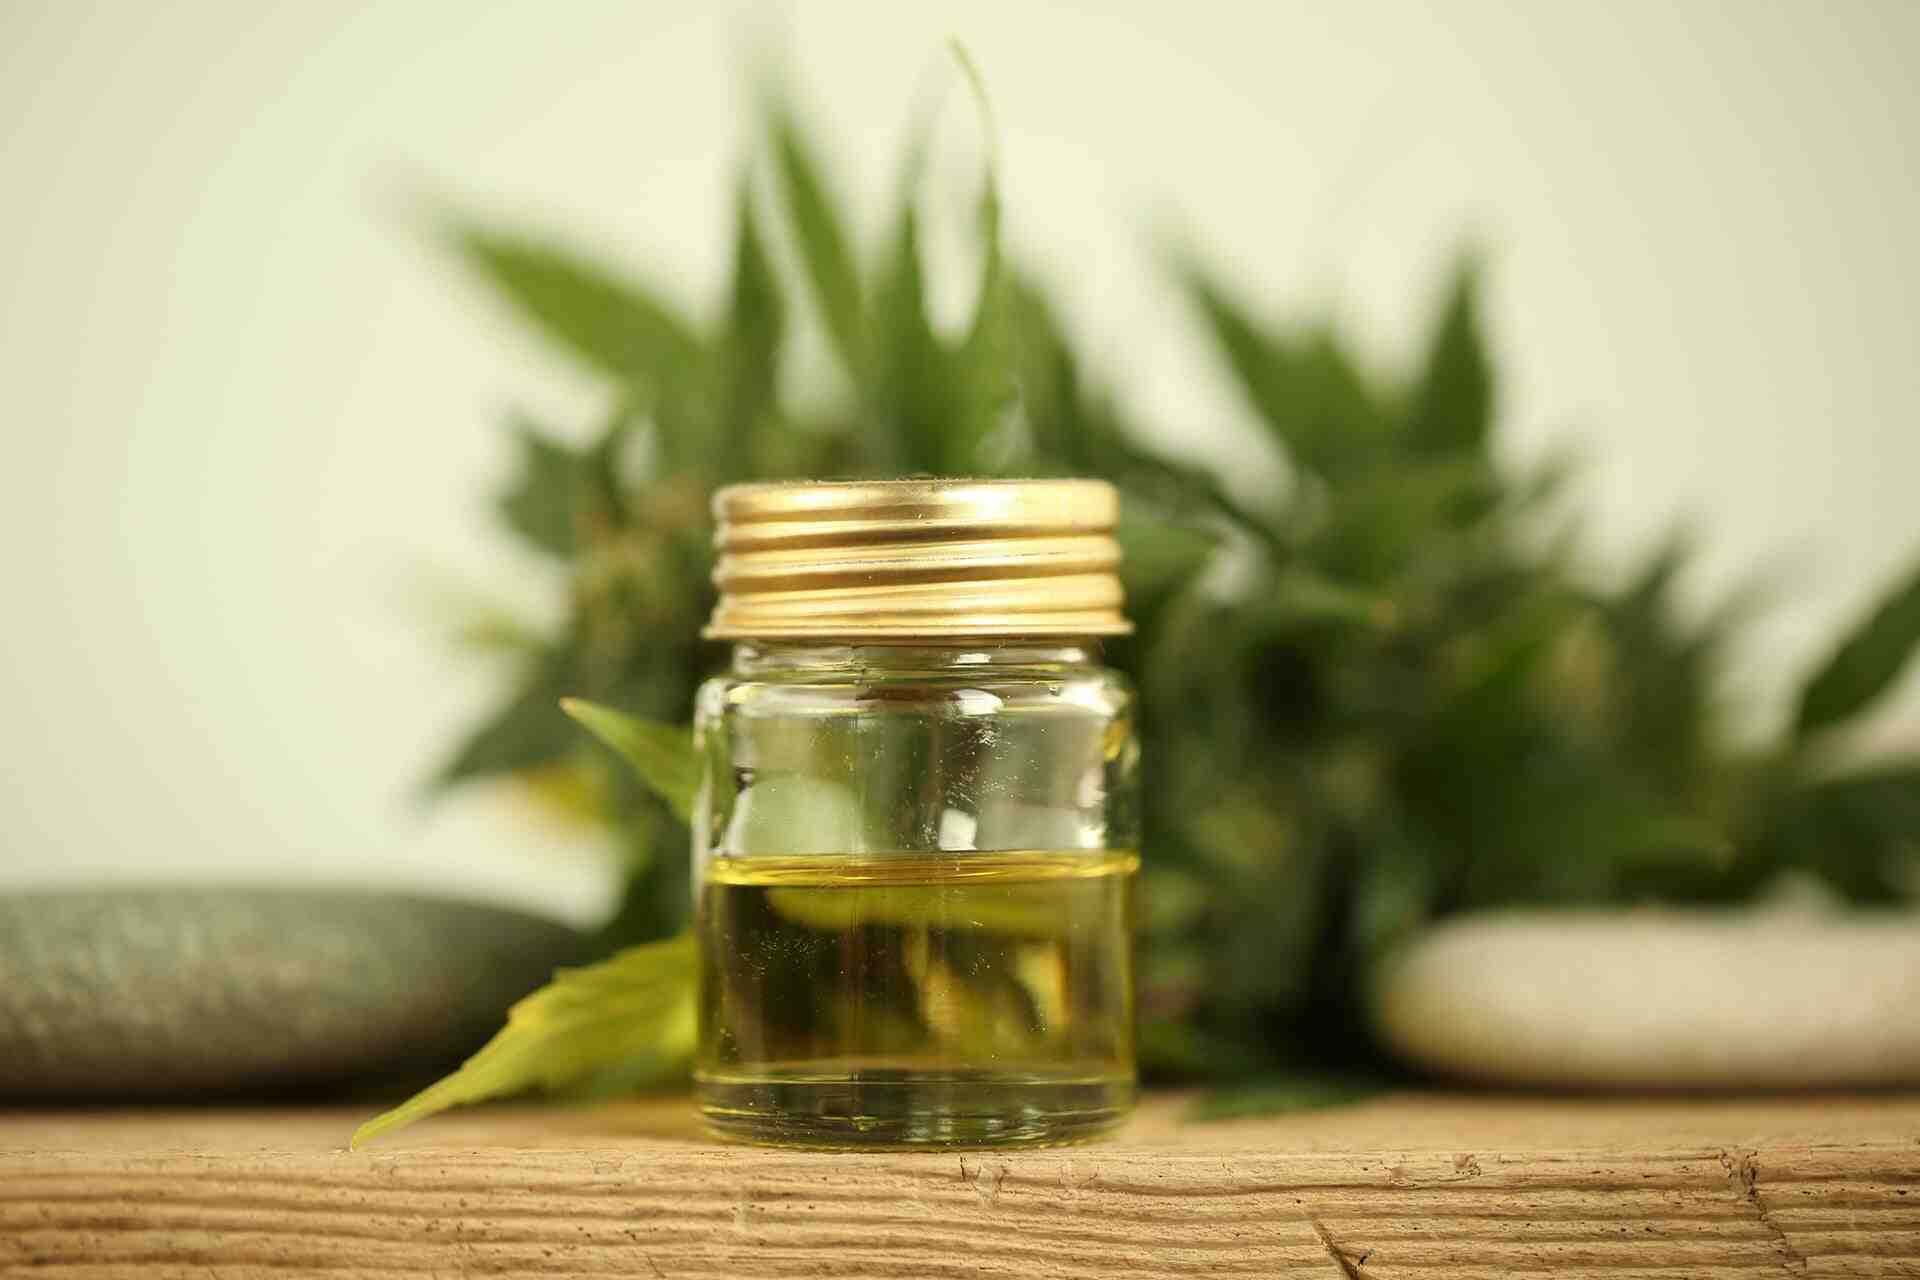 How much does CBD oil cost to buy?